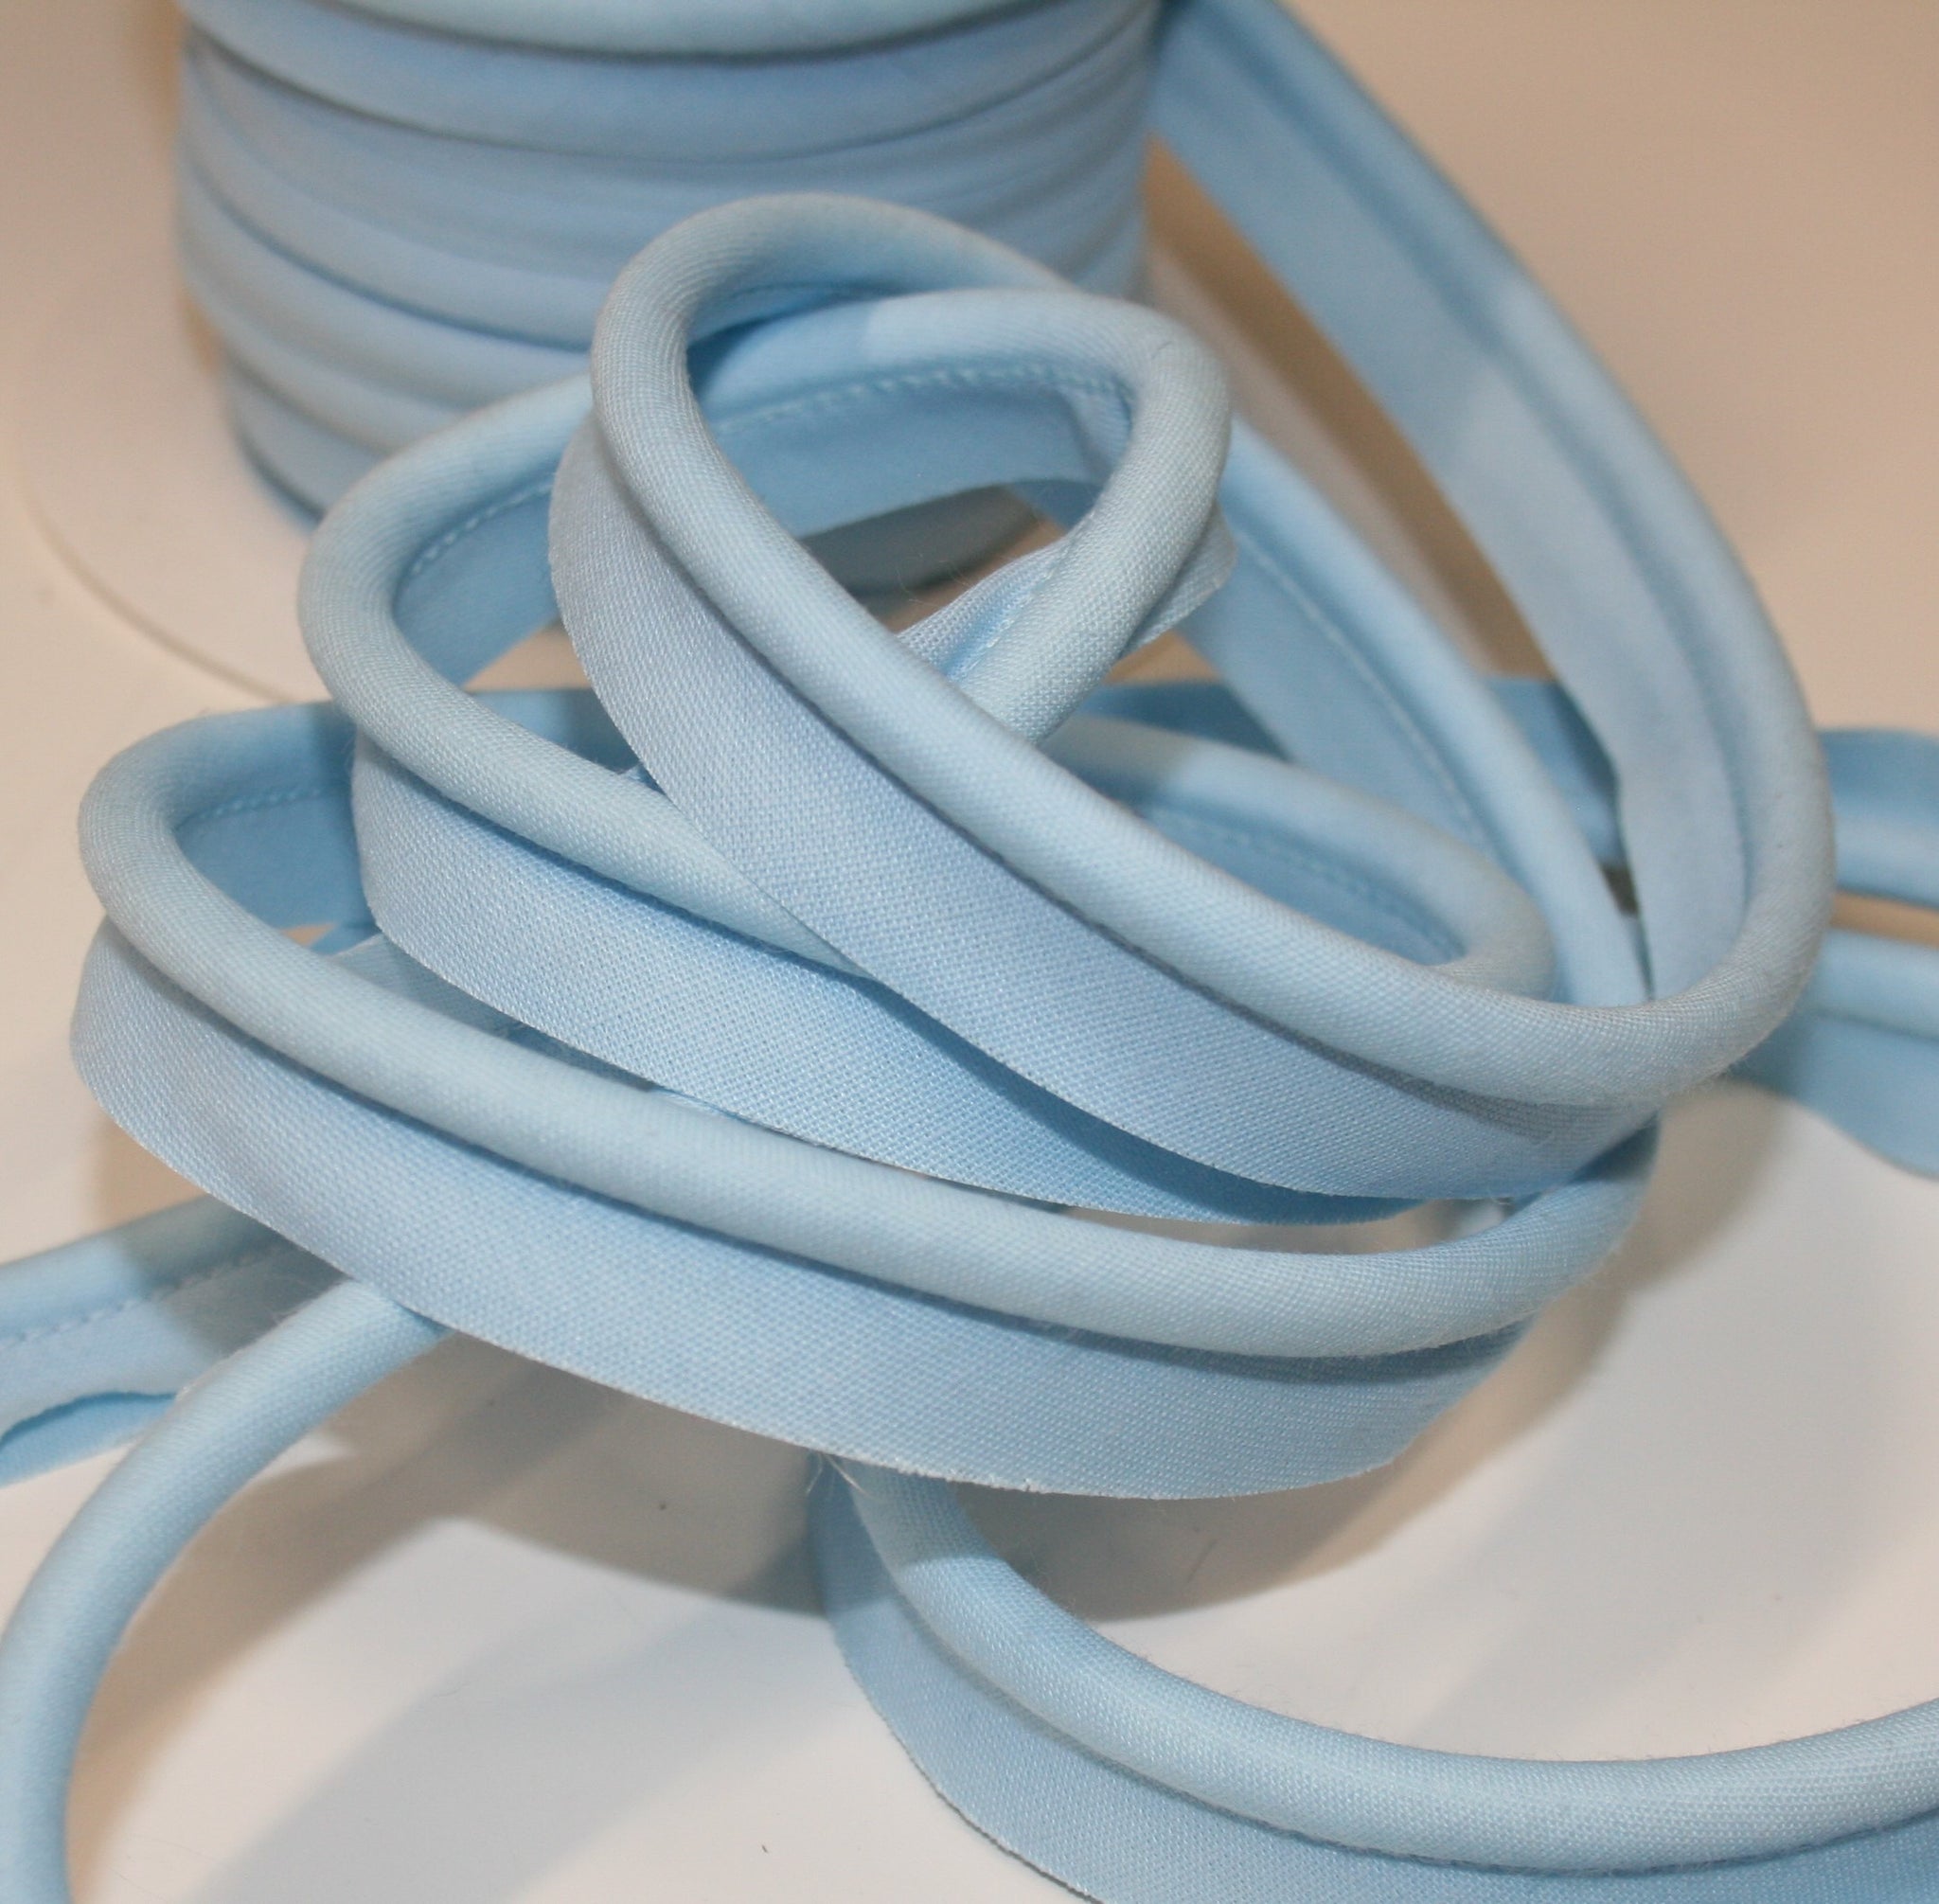 6mm Thick Ready Made Piping Cord – The Carolyn Rose School of Sewing